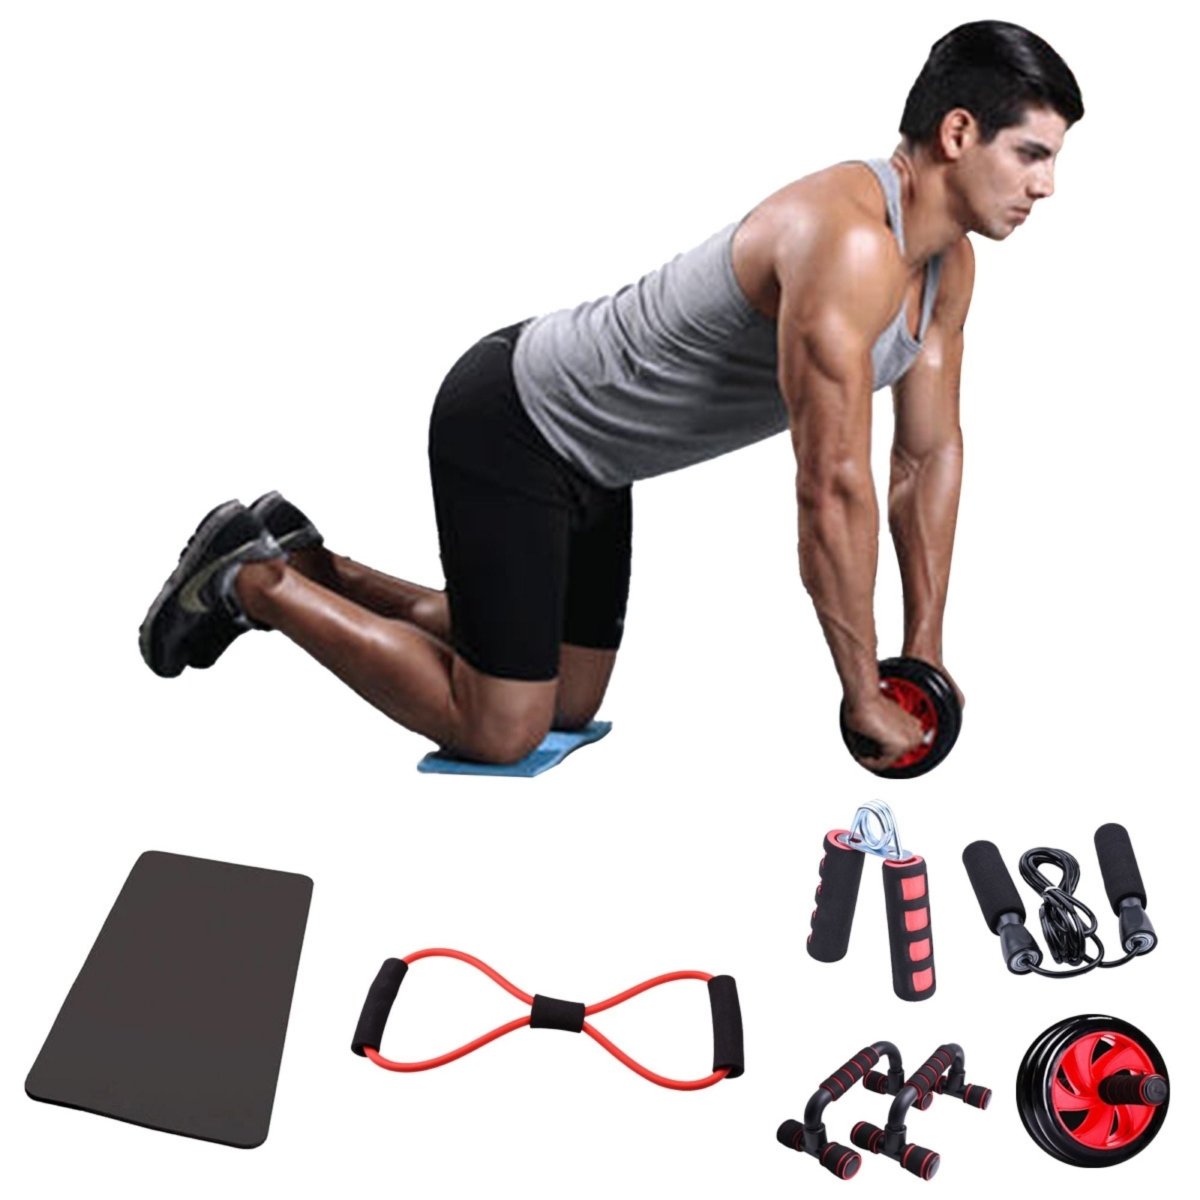 6 Piece Premium Workout Sets ab roller jump rope - Taplike